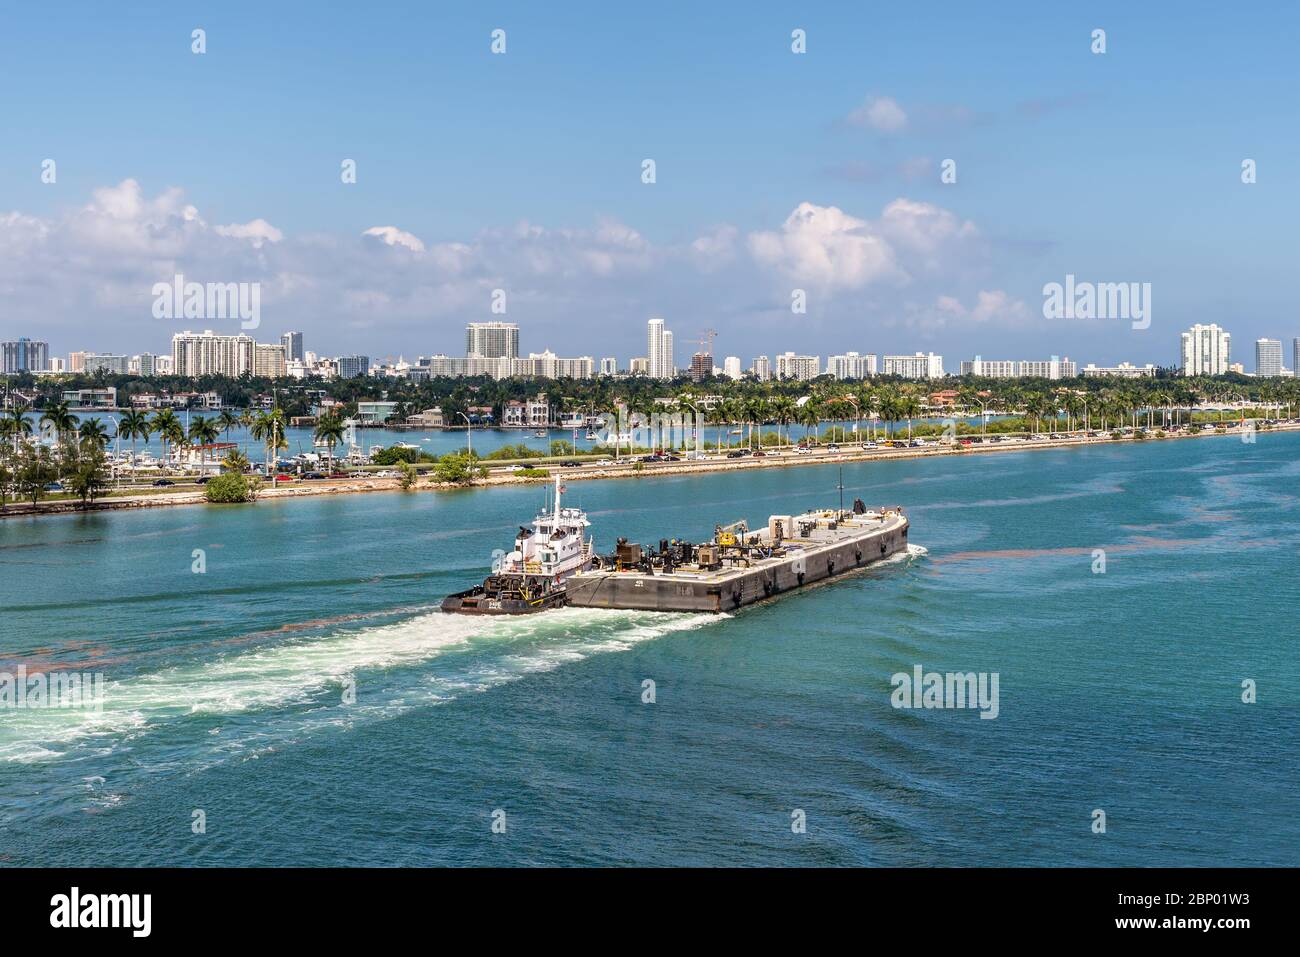 Miami, FL, United States - April 27, 2019: Tug boats helping the platform to navigate in Miami port. The busy Miami Main Channel water traffic in Miam Stock Photo